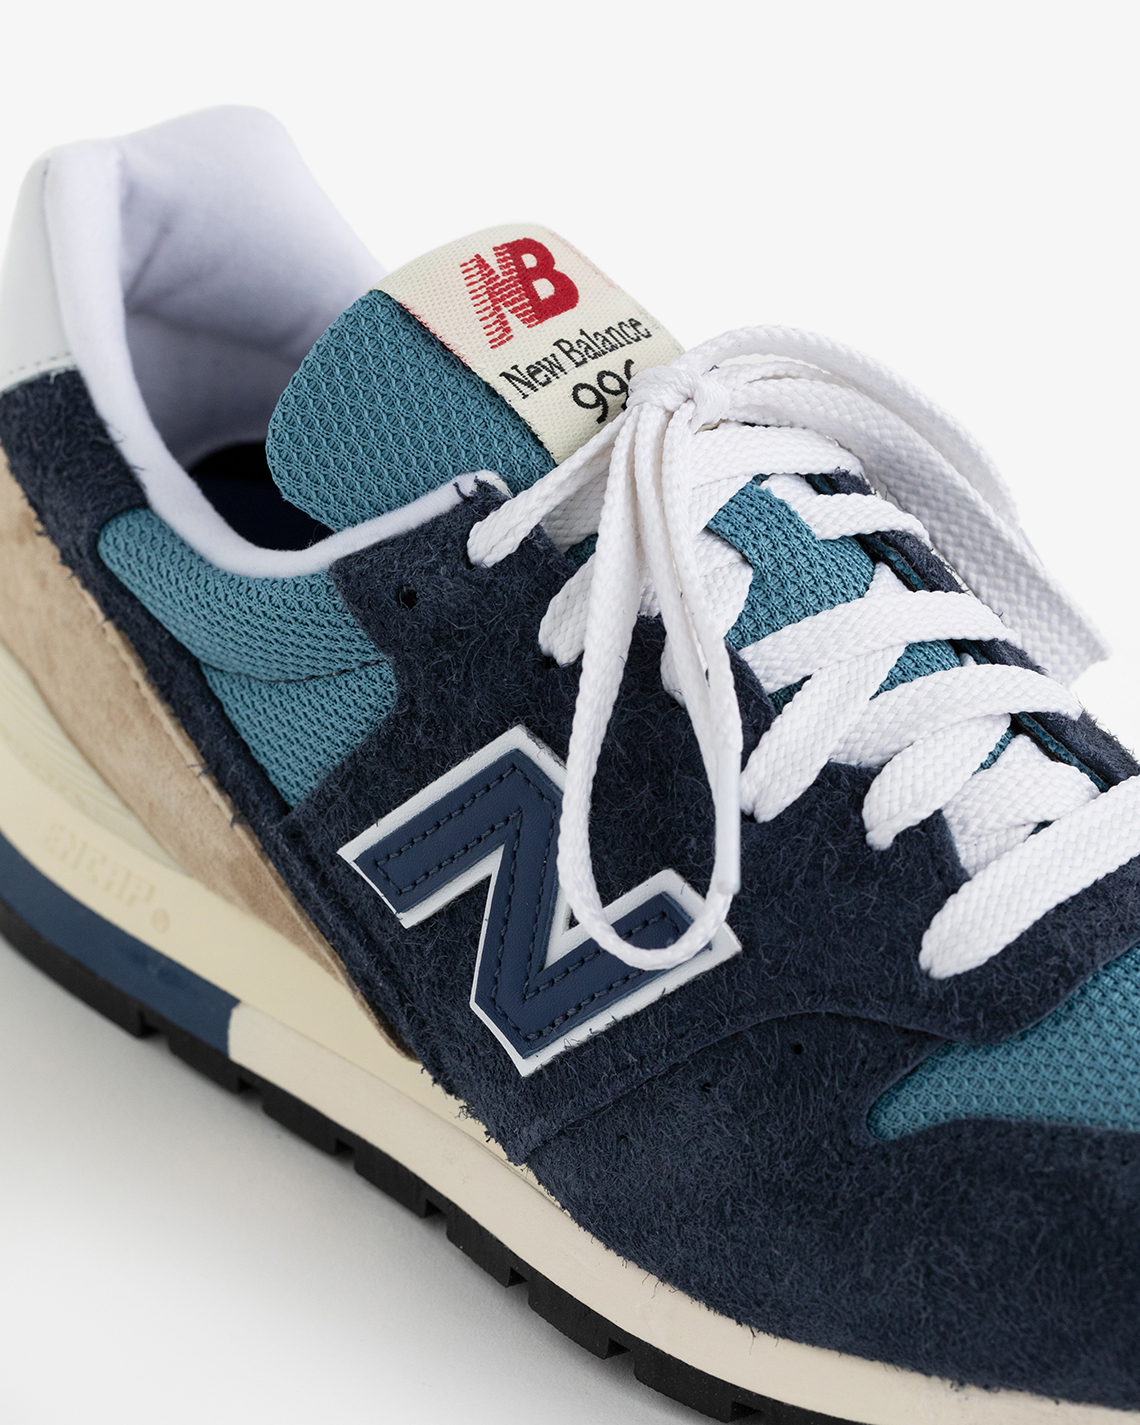 New Balance 996 Made In Usa New Balance 996 Exclusive 2